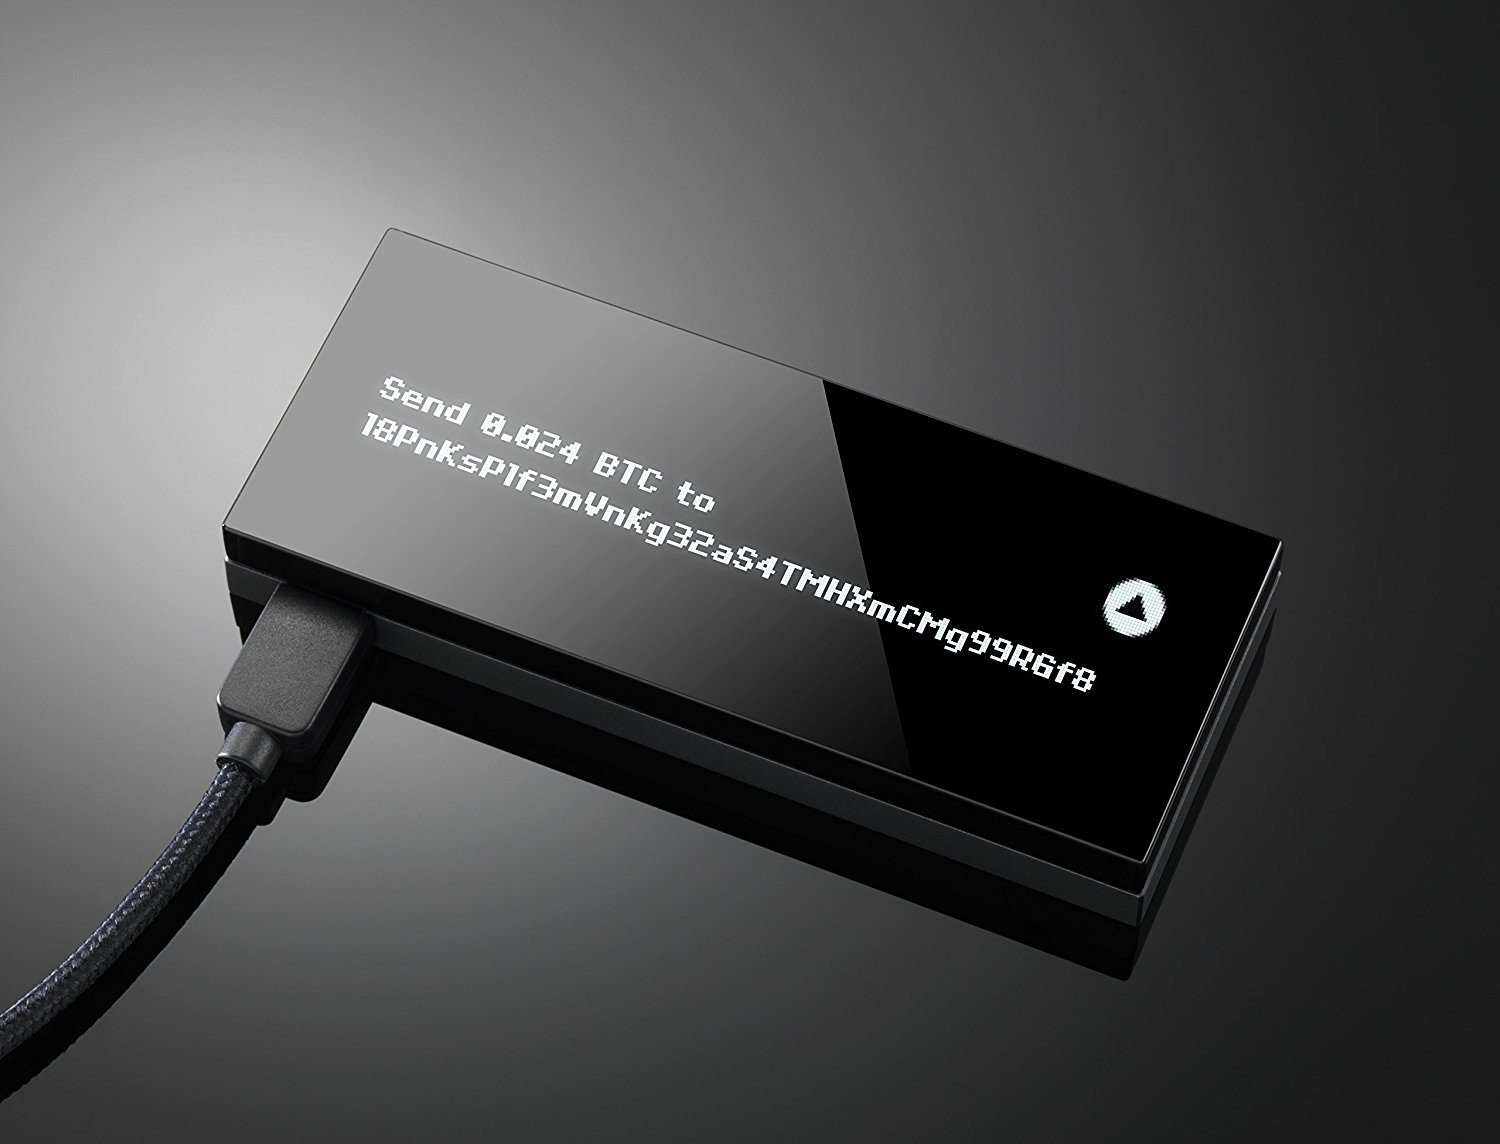 The KeepKey hardware wallet can be compromised in 15 minutes